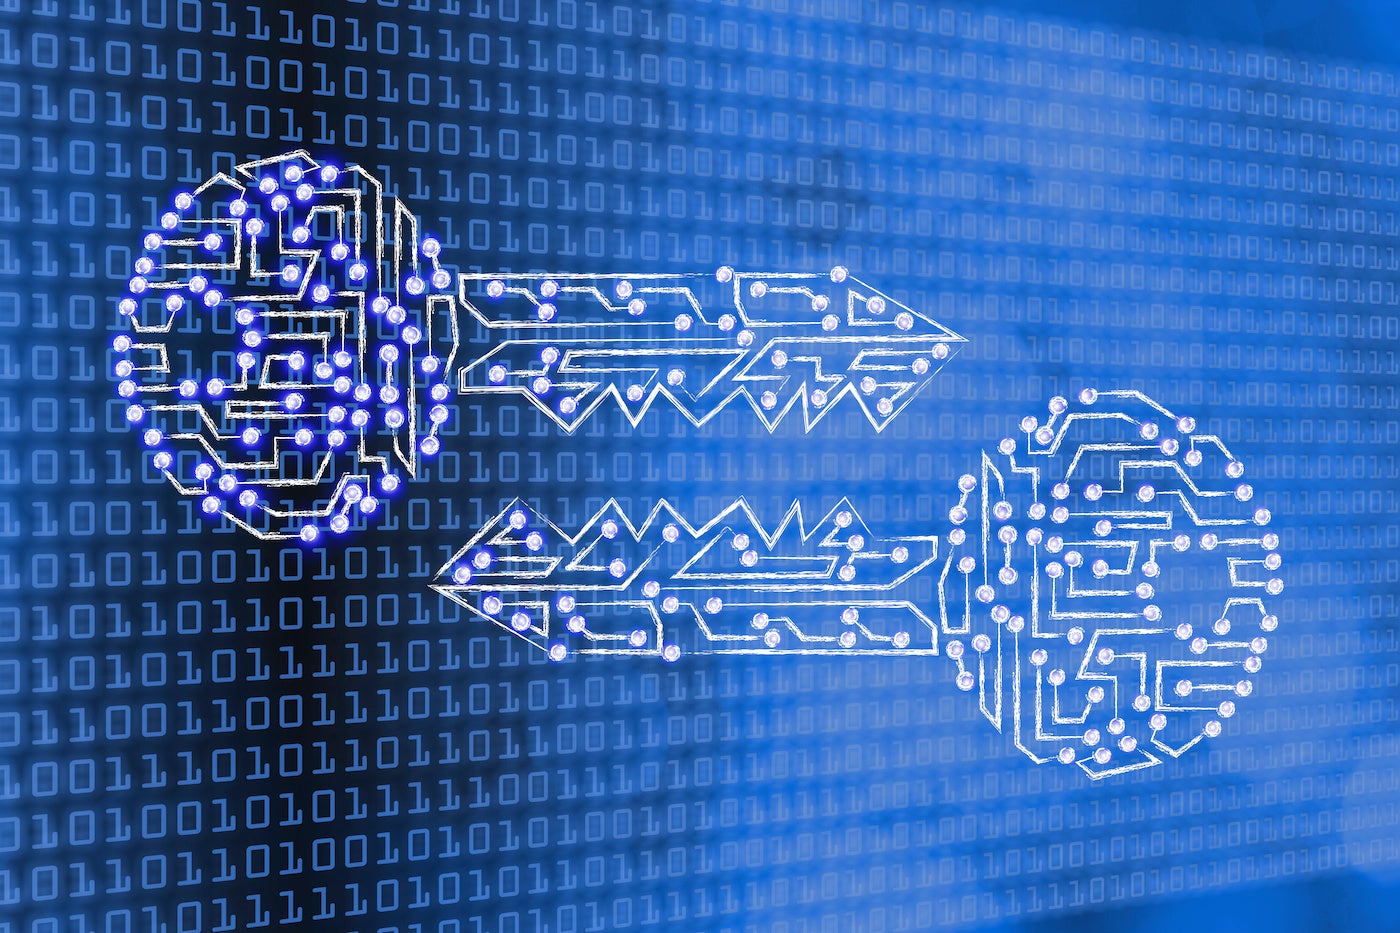 Two interlocking keys representing encryption over a background of machine code.